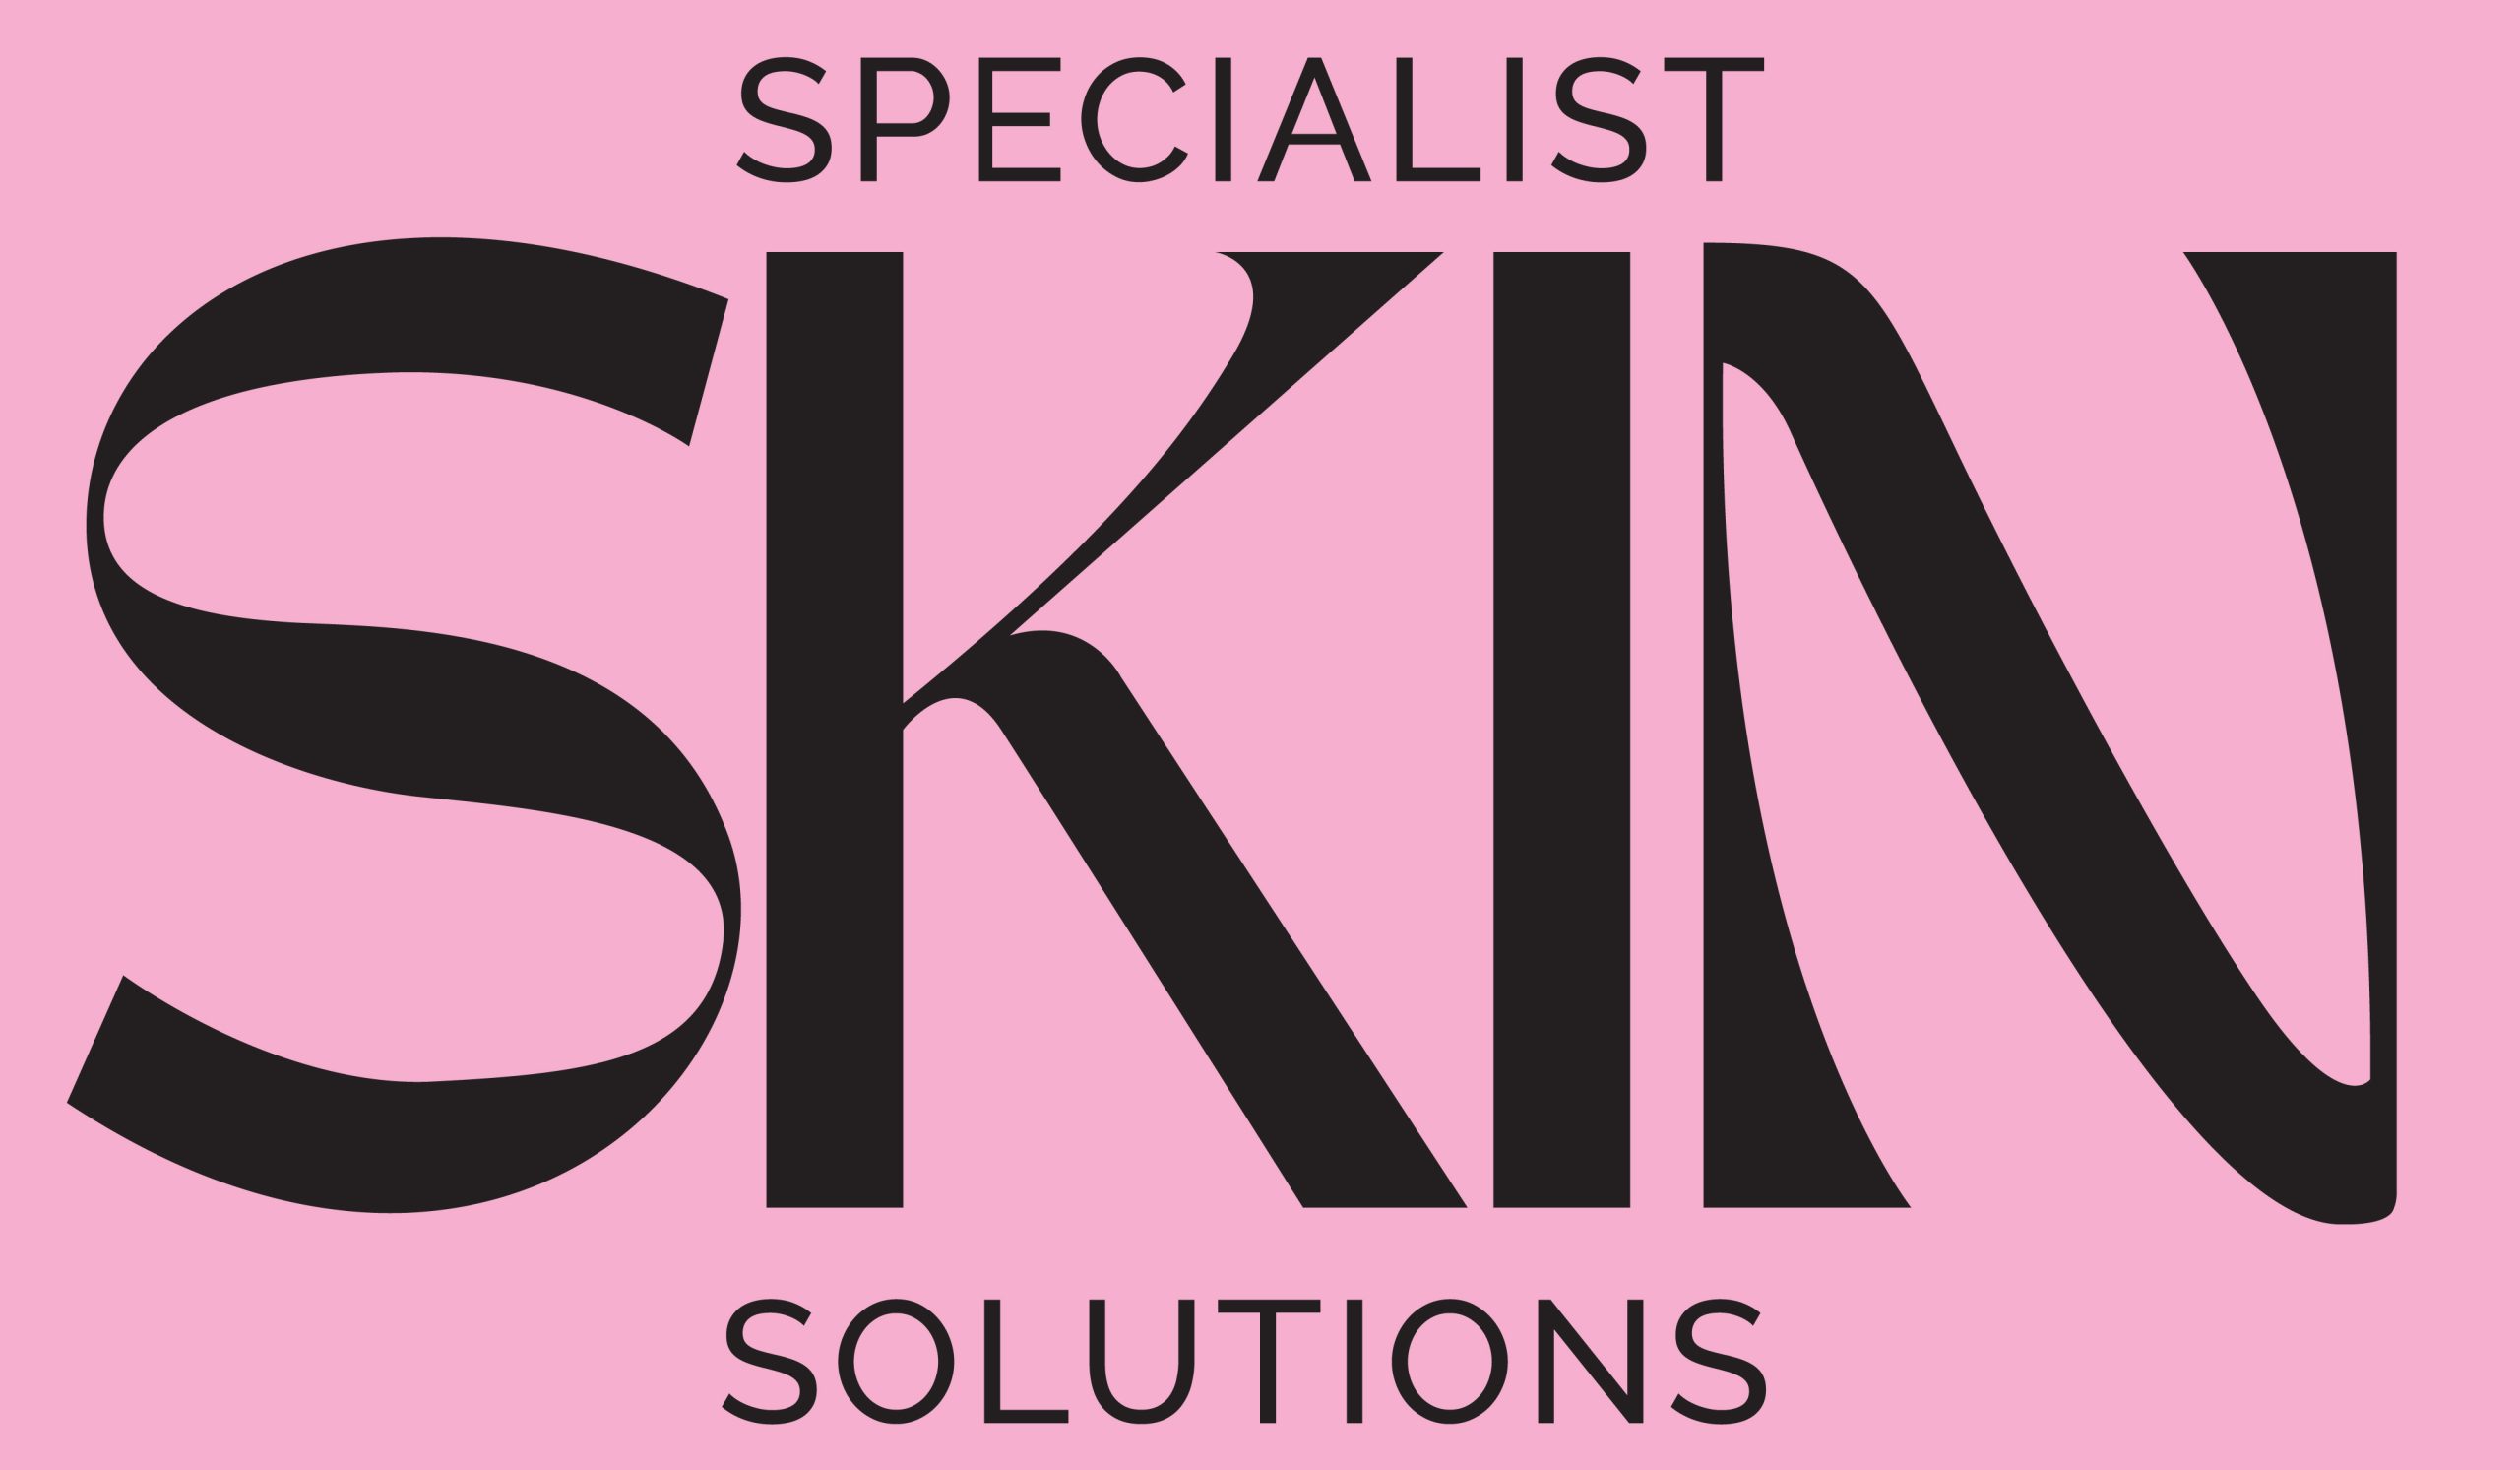 Specialist Skin Solutions